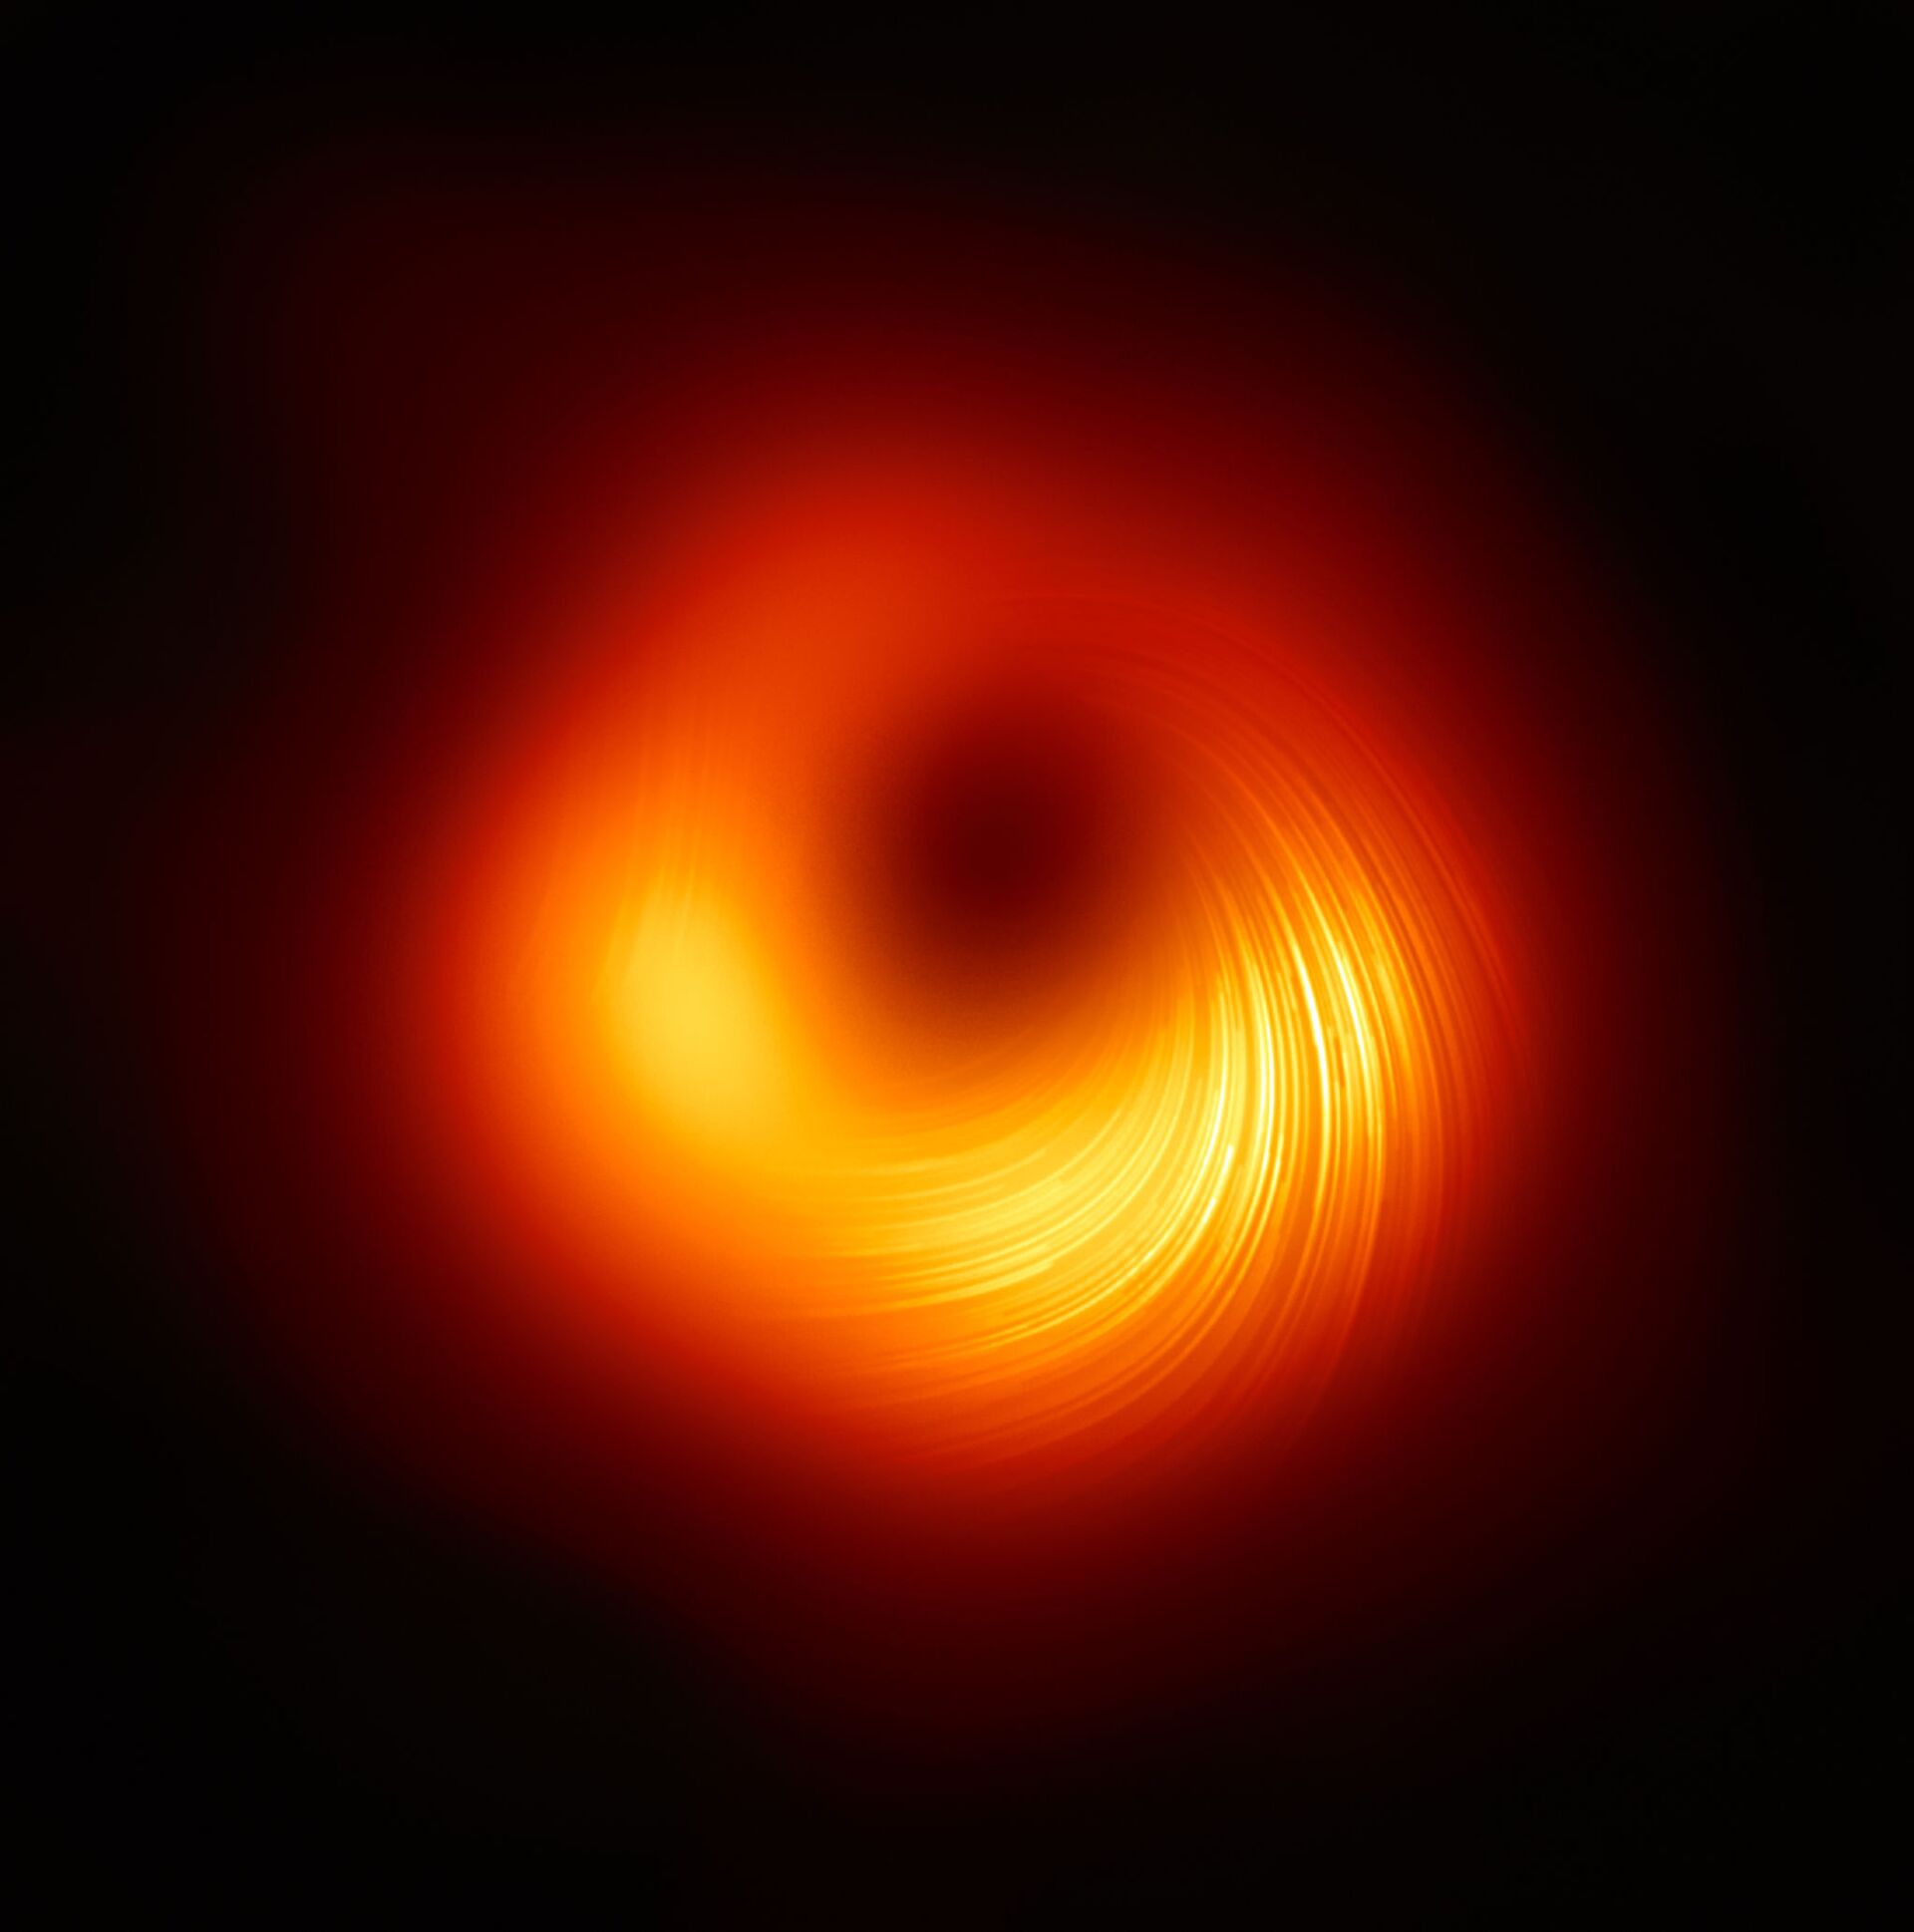 Jaw-Dropping Image Offers New Look at Supermassive Black Hole’s Swirling Magnetic Field - Sputnik International, 1920, 25.03.2021